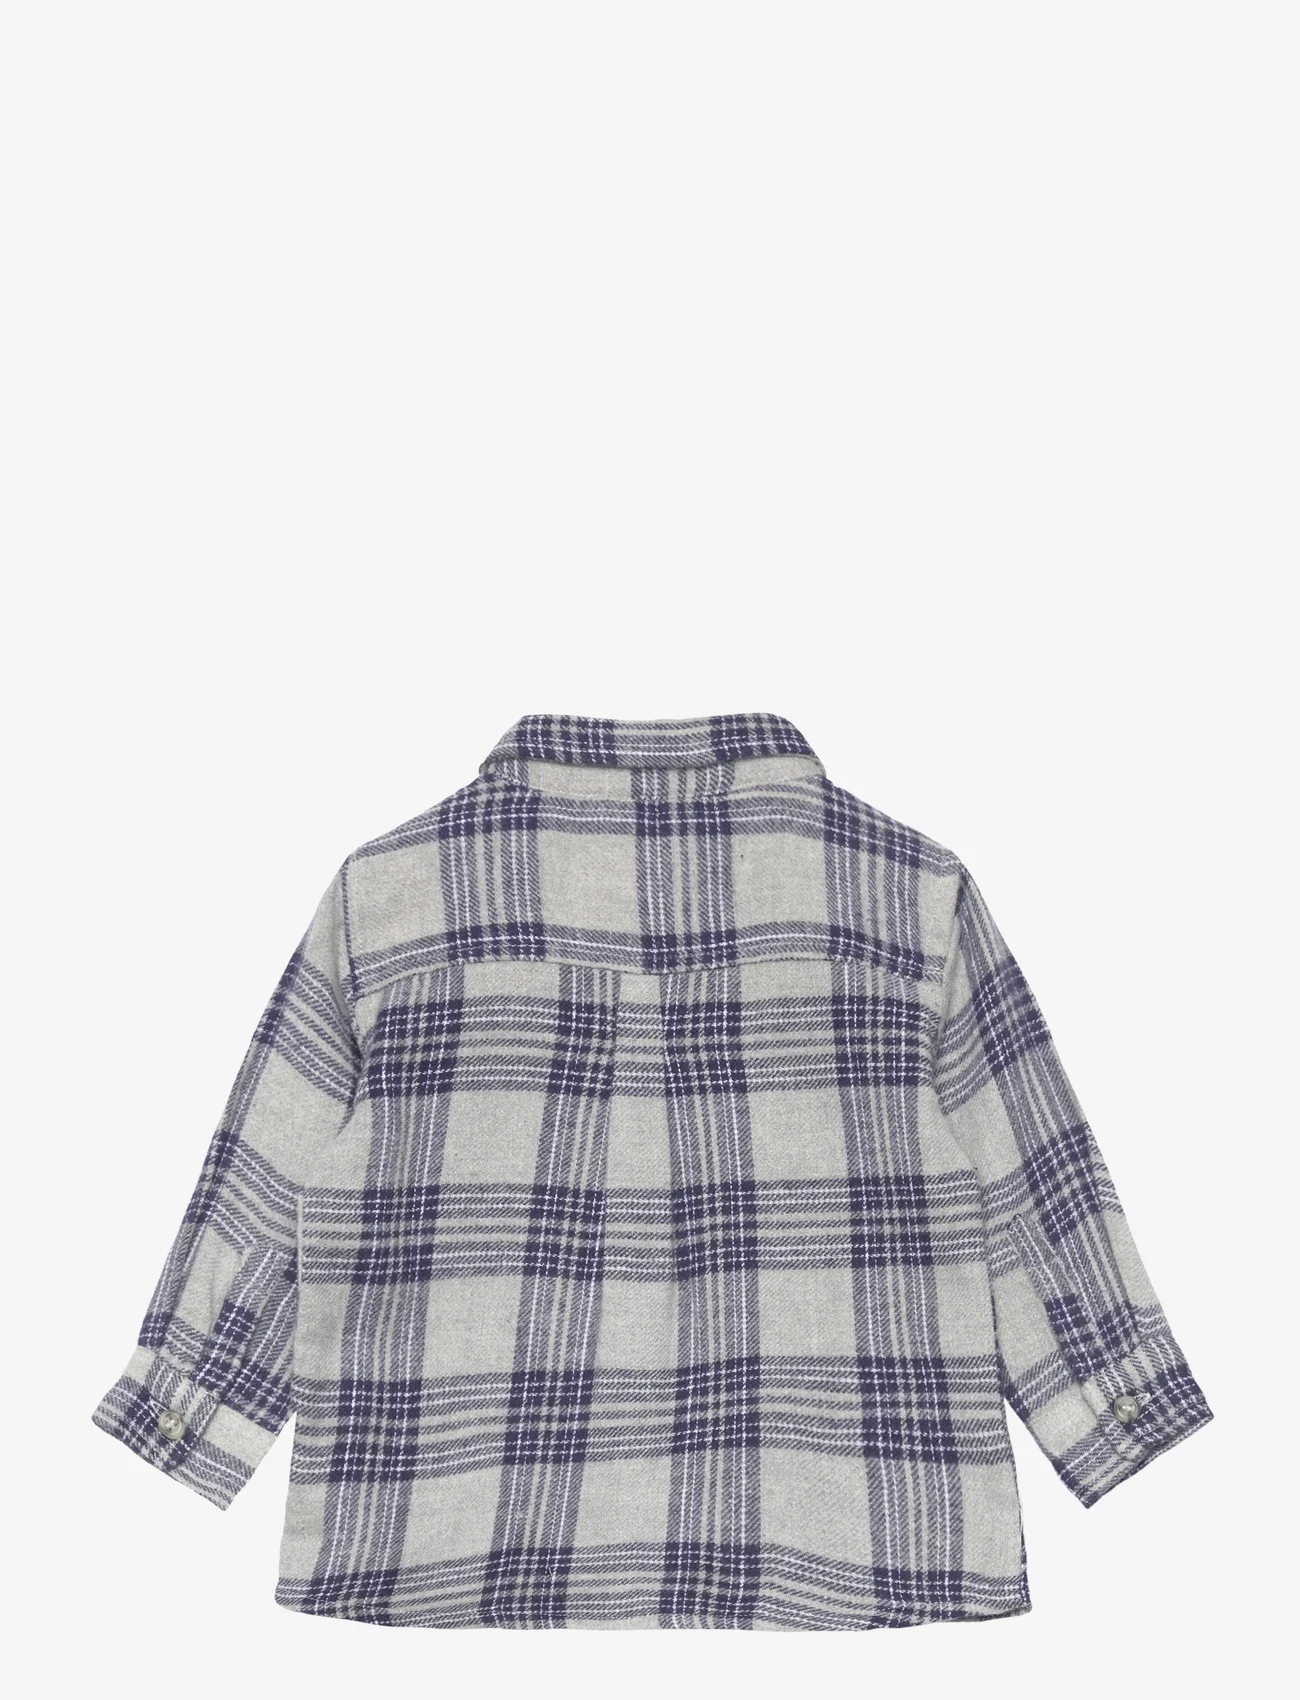 Sofie Schnoor Baby and Kids - Shirt - long-sleeved shirts - grey check - 1